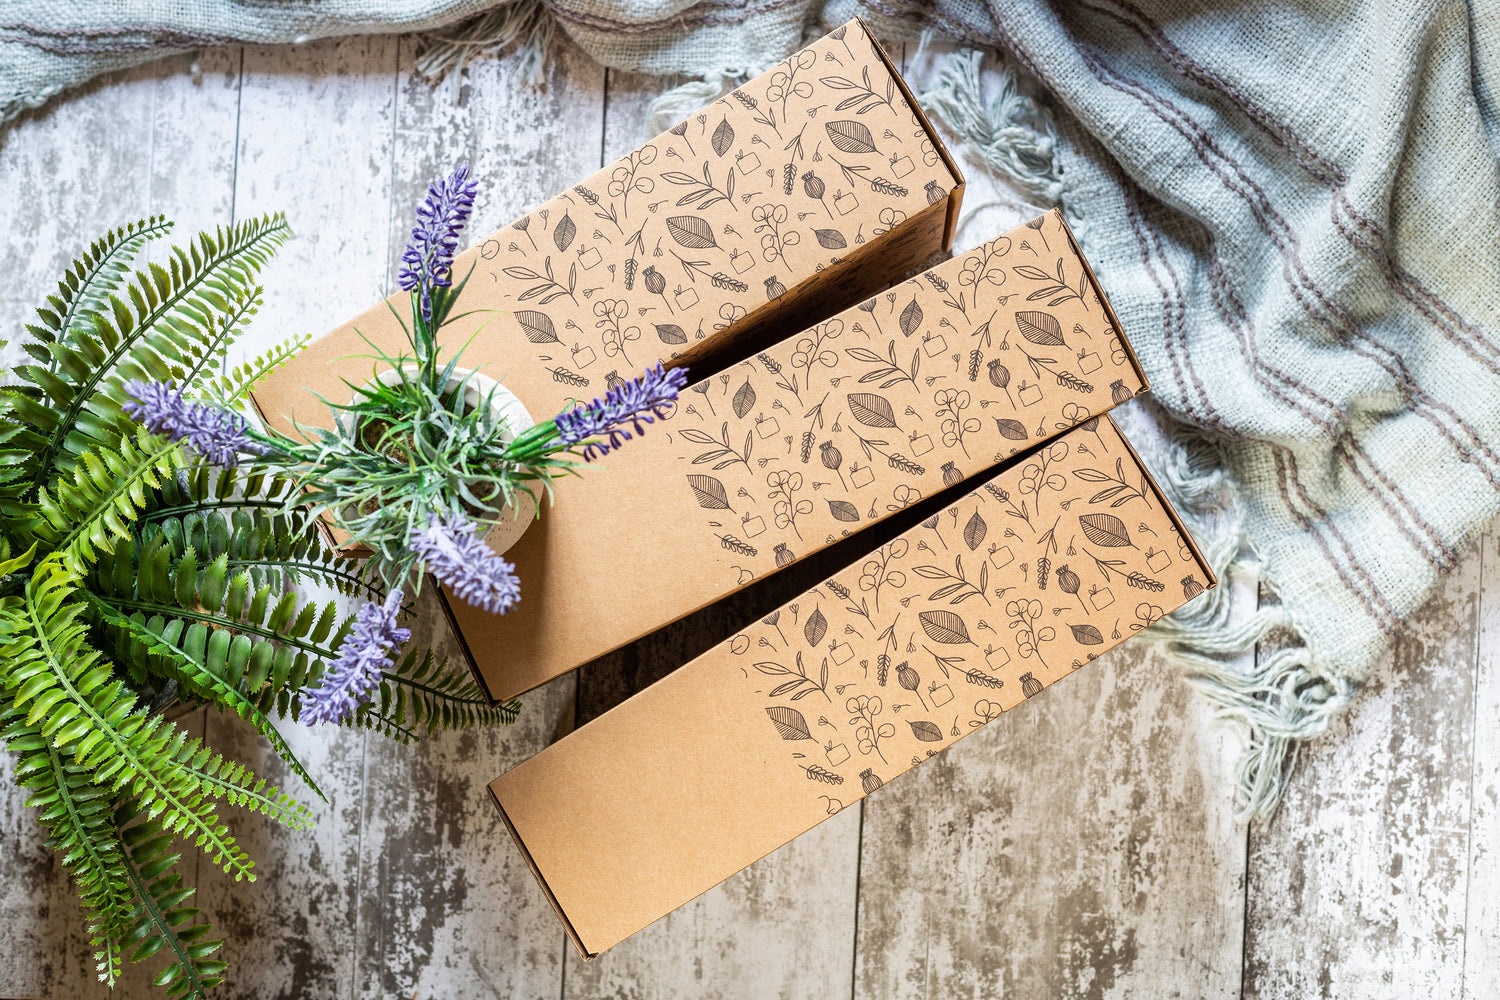 Sustainable Corporate Gifts UK - Three Sustainable Gift Boxes with botanical design